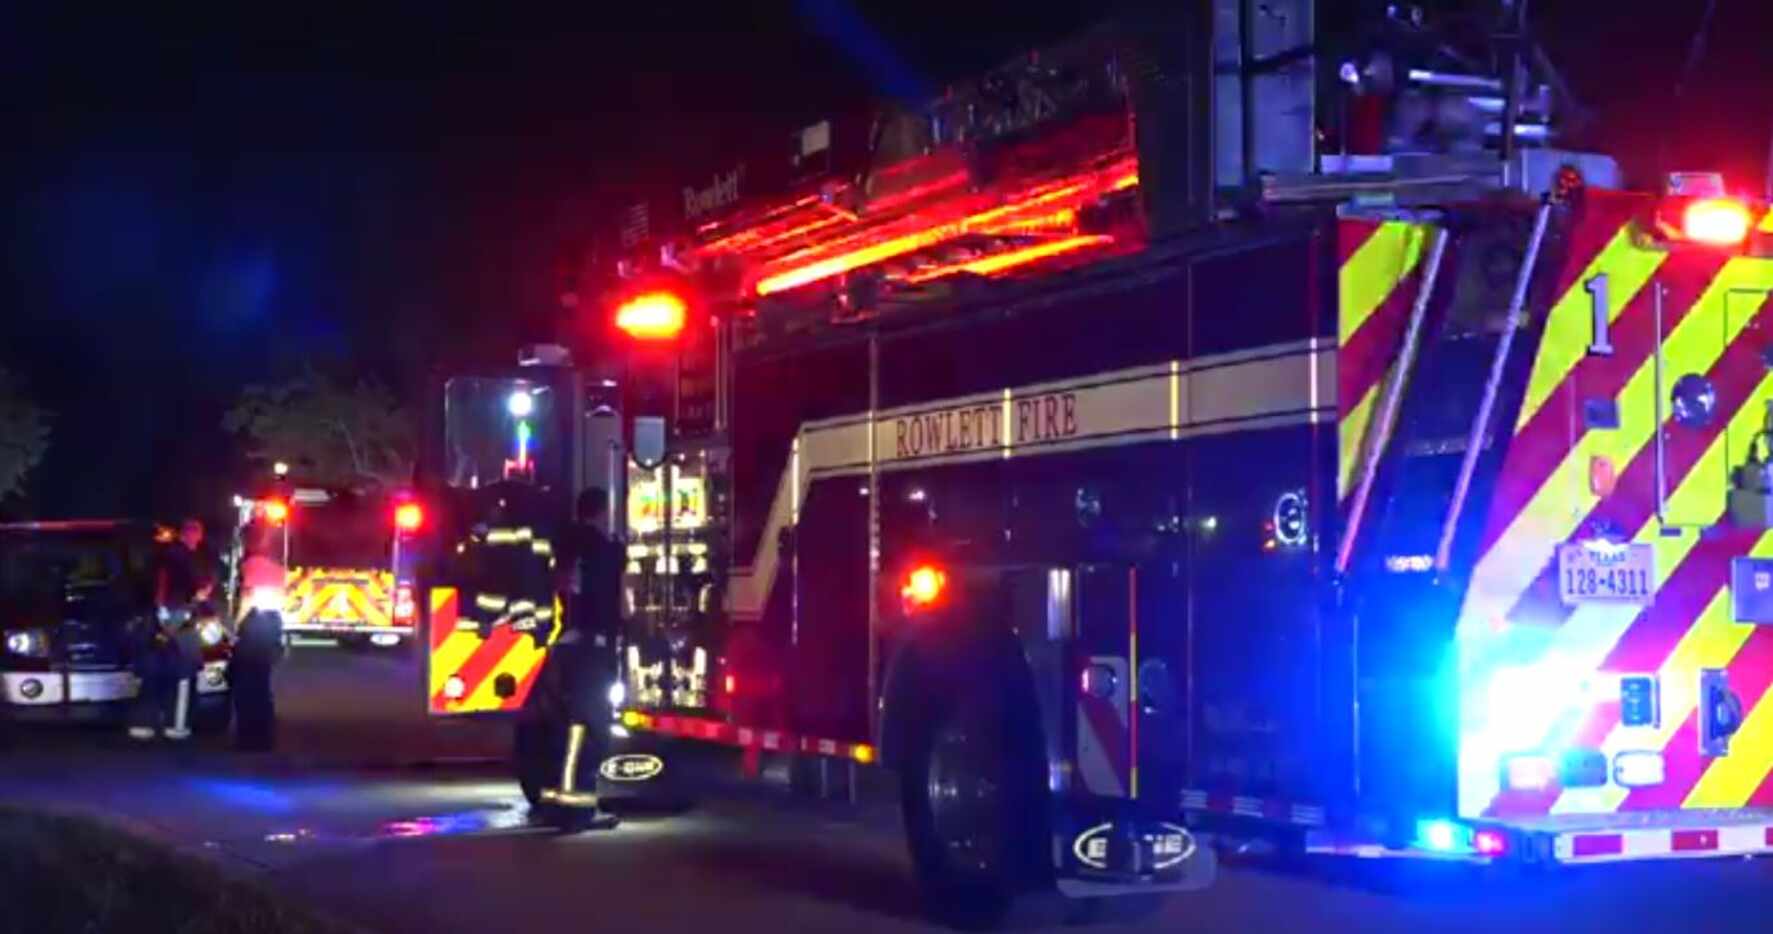 Rowlett firefighters were called to the scene, but it's unclear whether they had to...